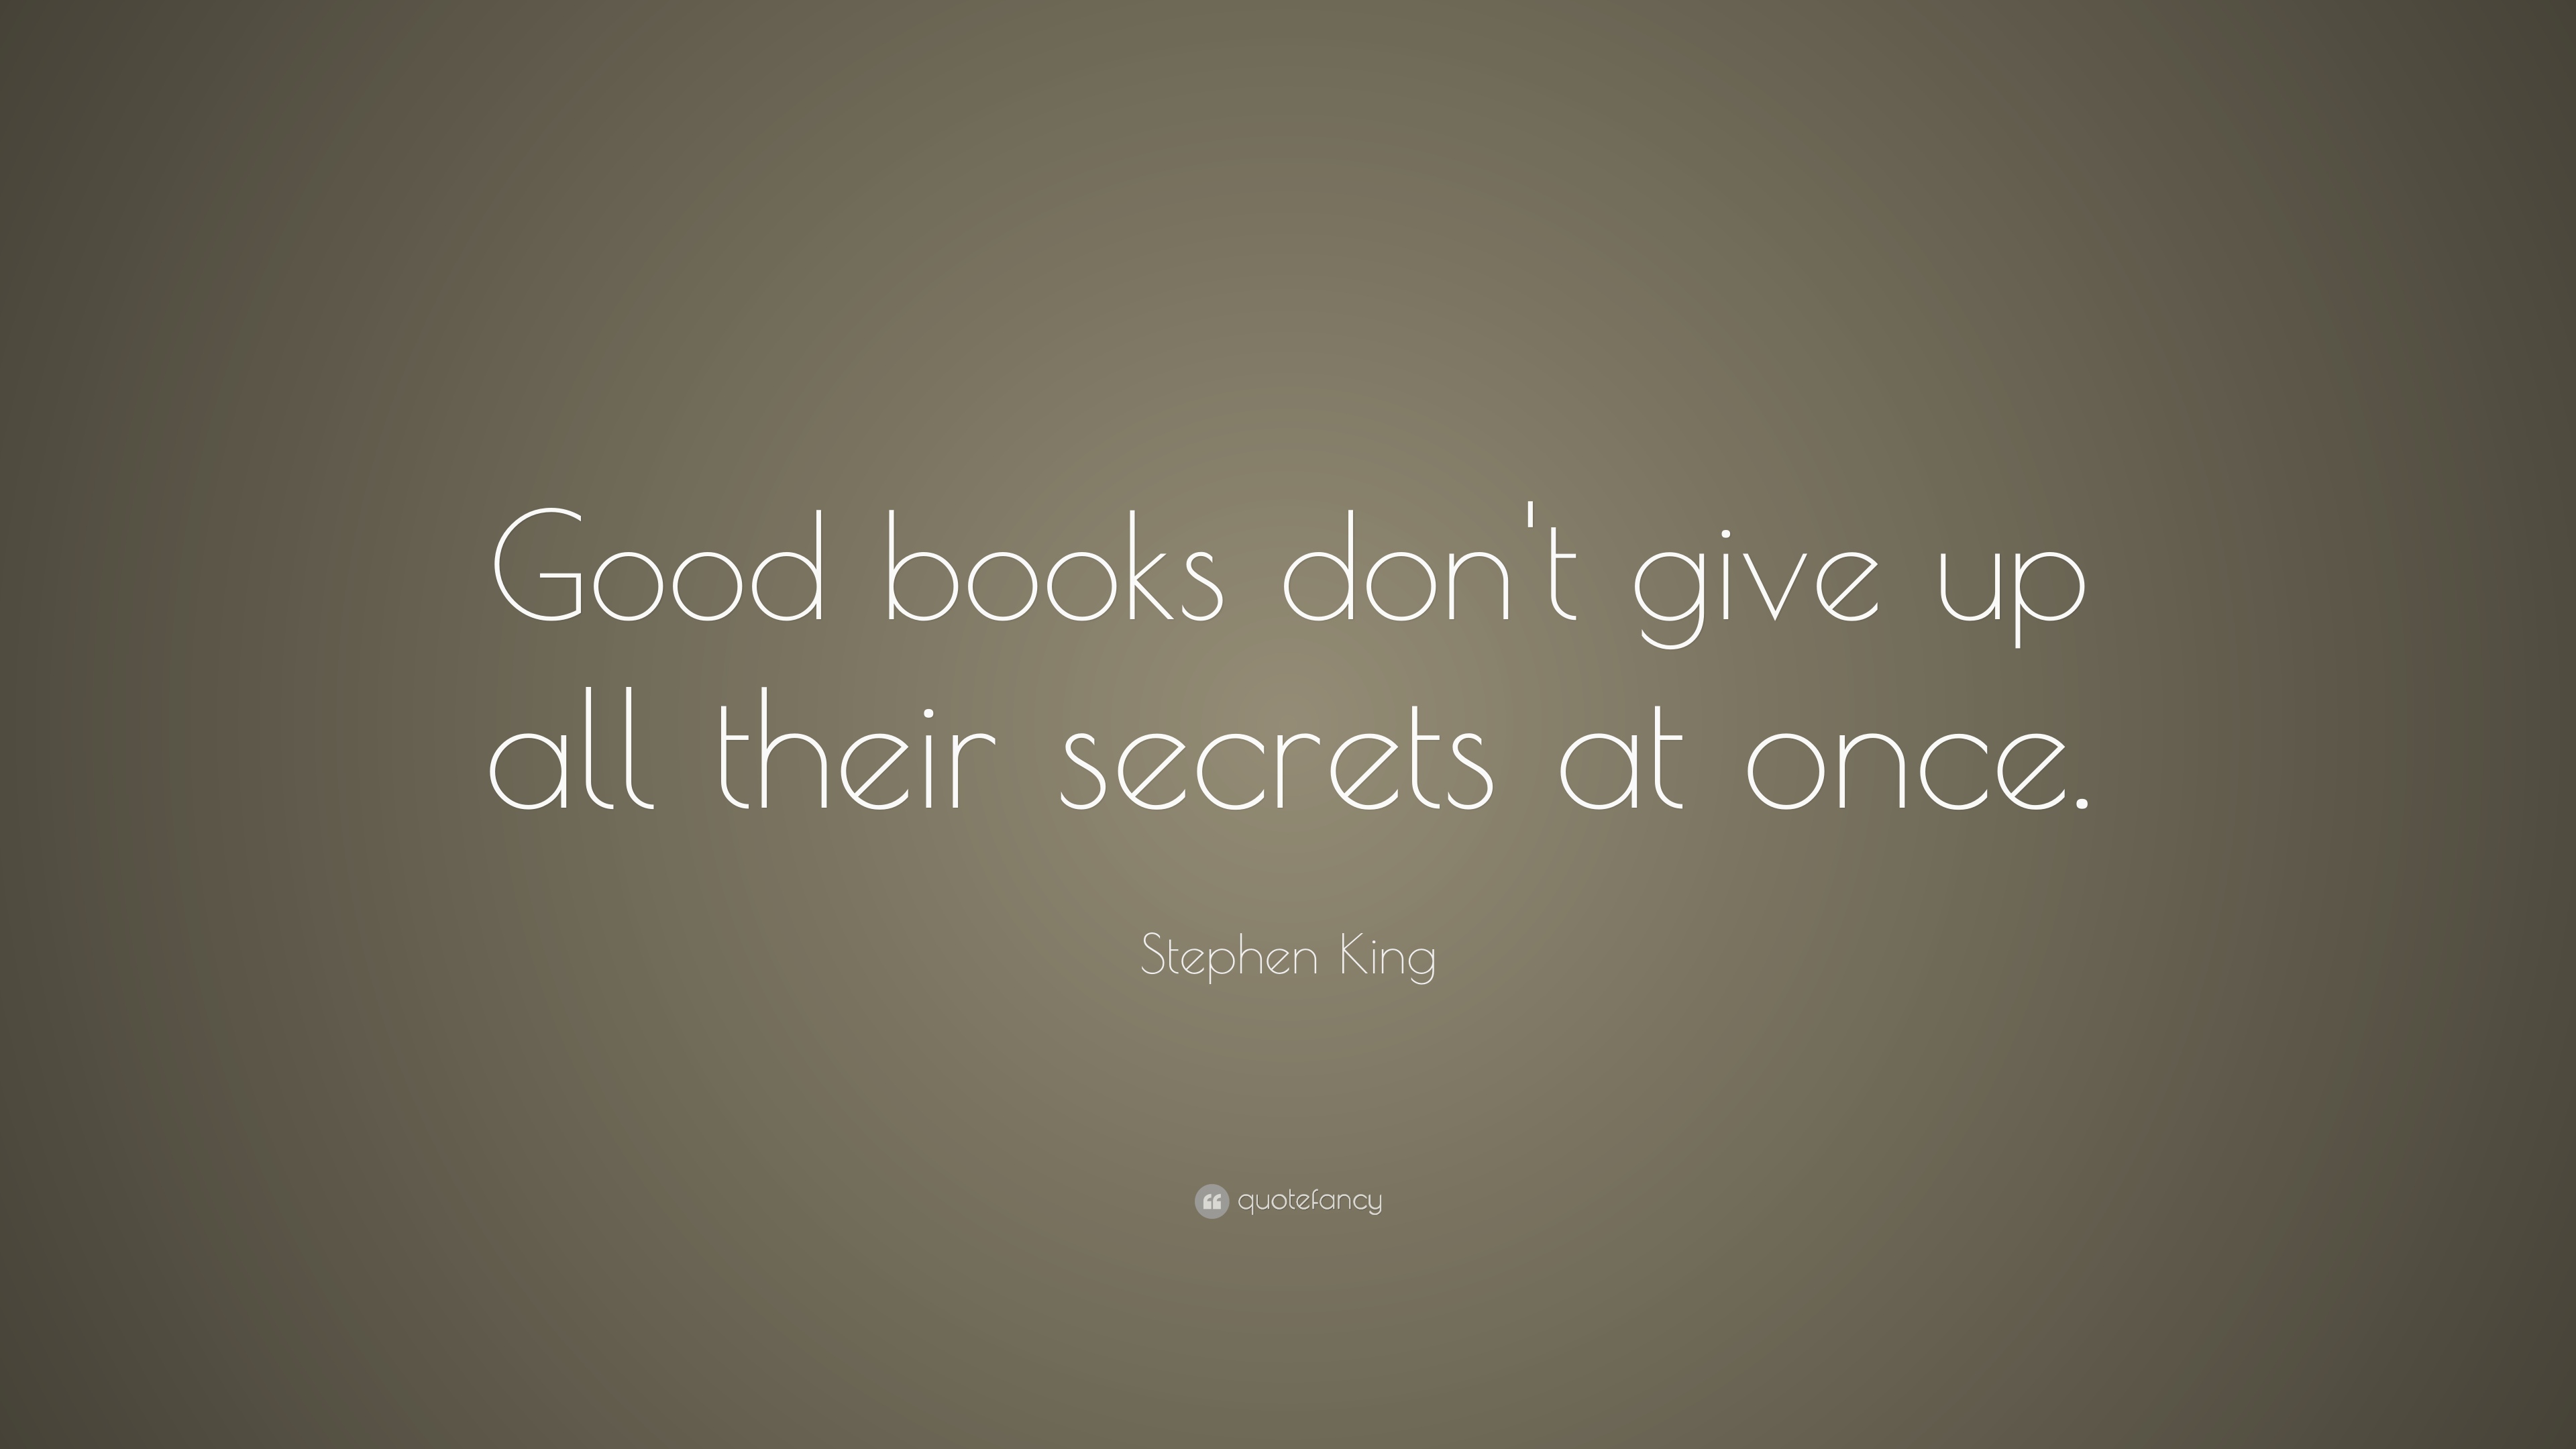 Stephen King Quote Good books dont give up all their secrets at